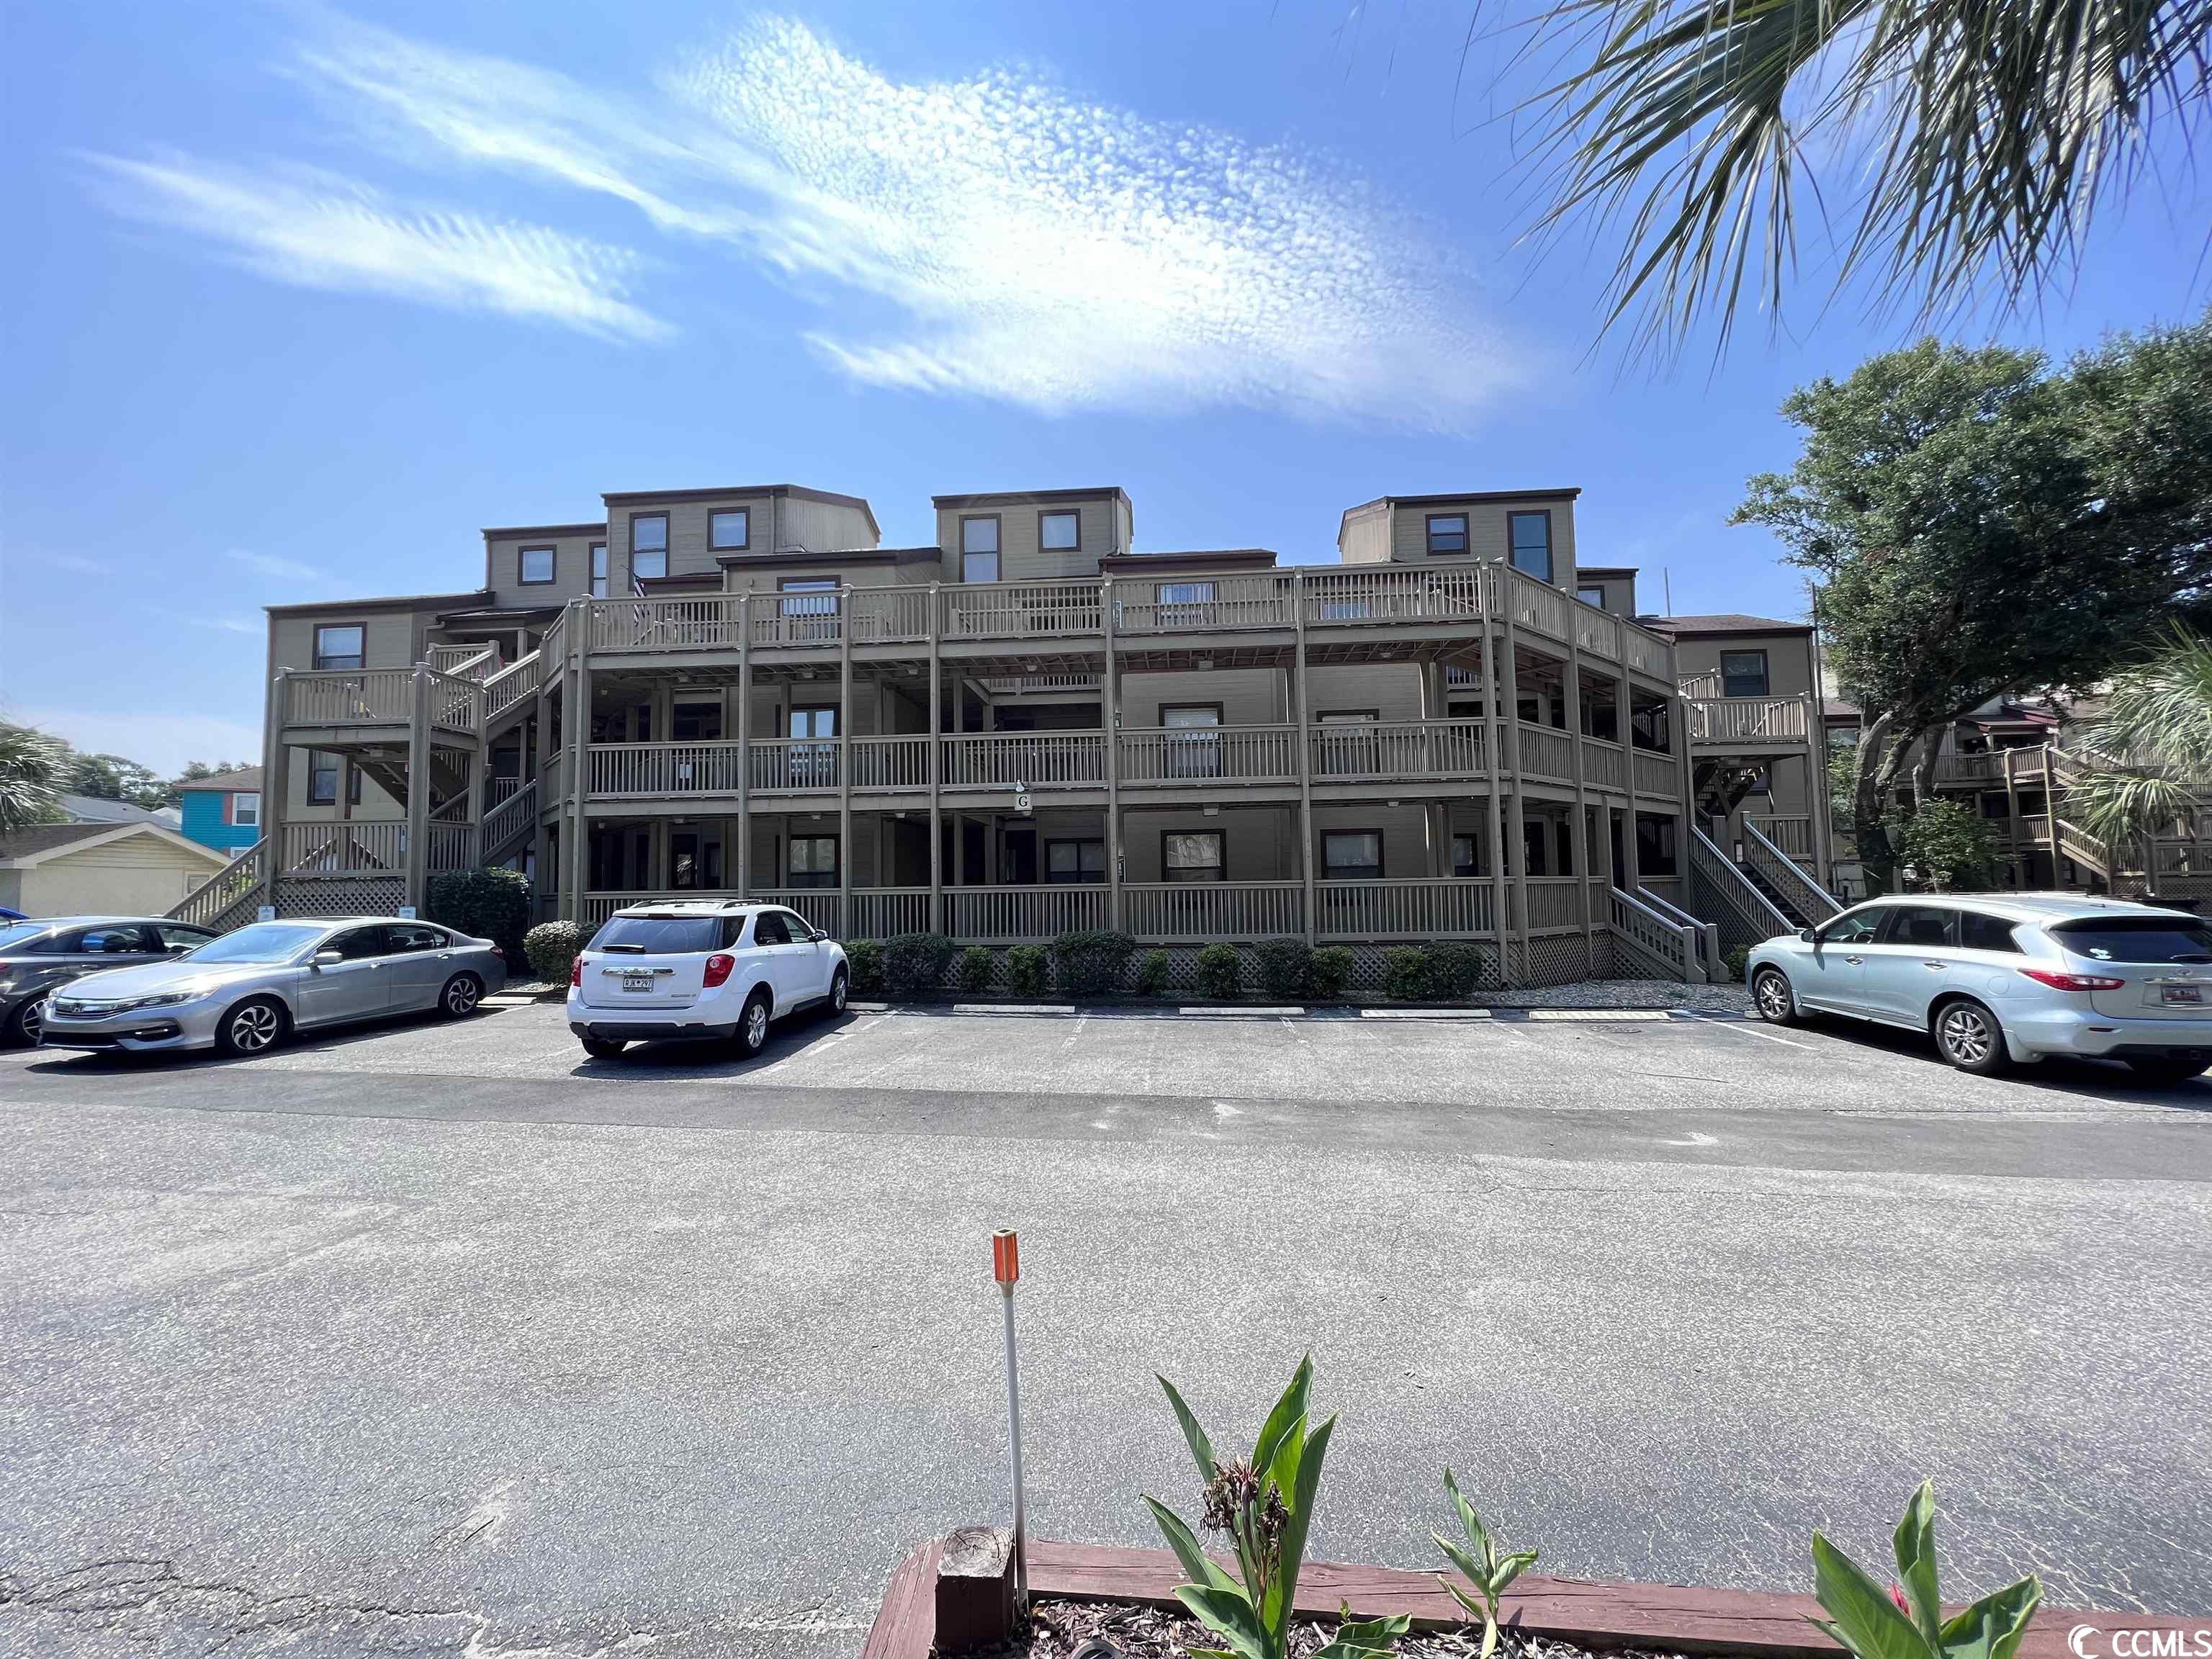 looking for a labor day sale to make your beach living dreams come true?  well here it is and it couldn't be anymore perfect. this 2bed 2bath condo is immaculate and has had numerous updates making it move in ready.  a large renovation was completed around 2020 and most recently new flooring and paint in the bedrooms in 2023.  dunes pointe is a dream location!  only a few short blocks to the ocean, centrally located to many shops and fabulous restaurants, golf cart storage for owners, and an indoor pool and hot tub.  don't forget about the marsh views and the award winning dunes club golf course view that is a very short distance away.  the really great perk of this unit is the balcony has a vinyl window and screen system along with a portable heating and air unit making this additional heated and cooled living space.  time is of the essence with this beauty, so reach out to your trusted realtor and plan for a showing now.